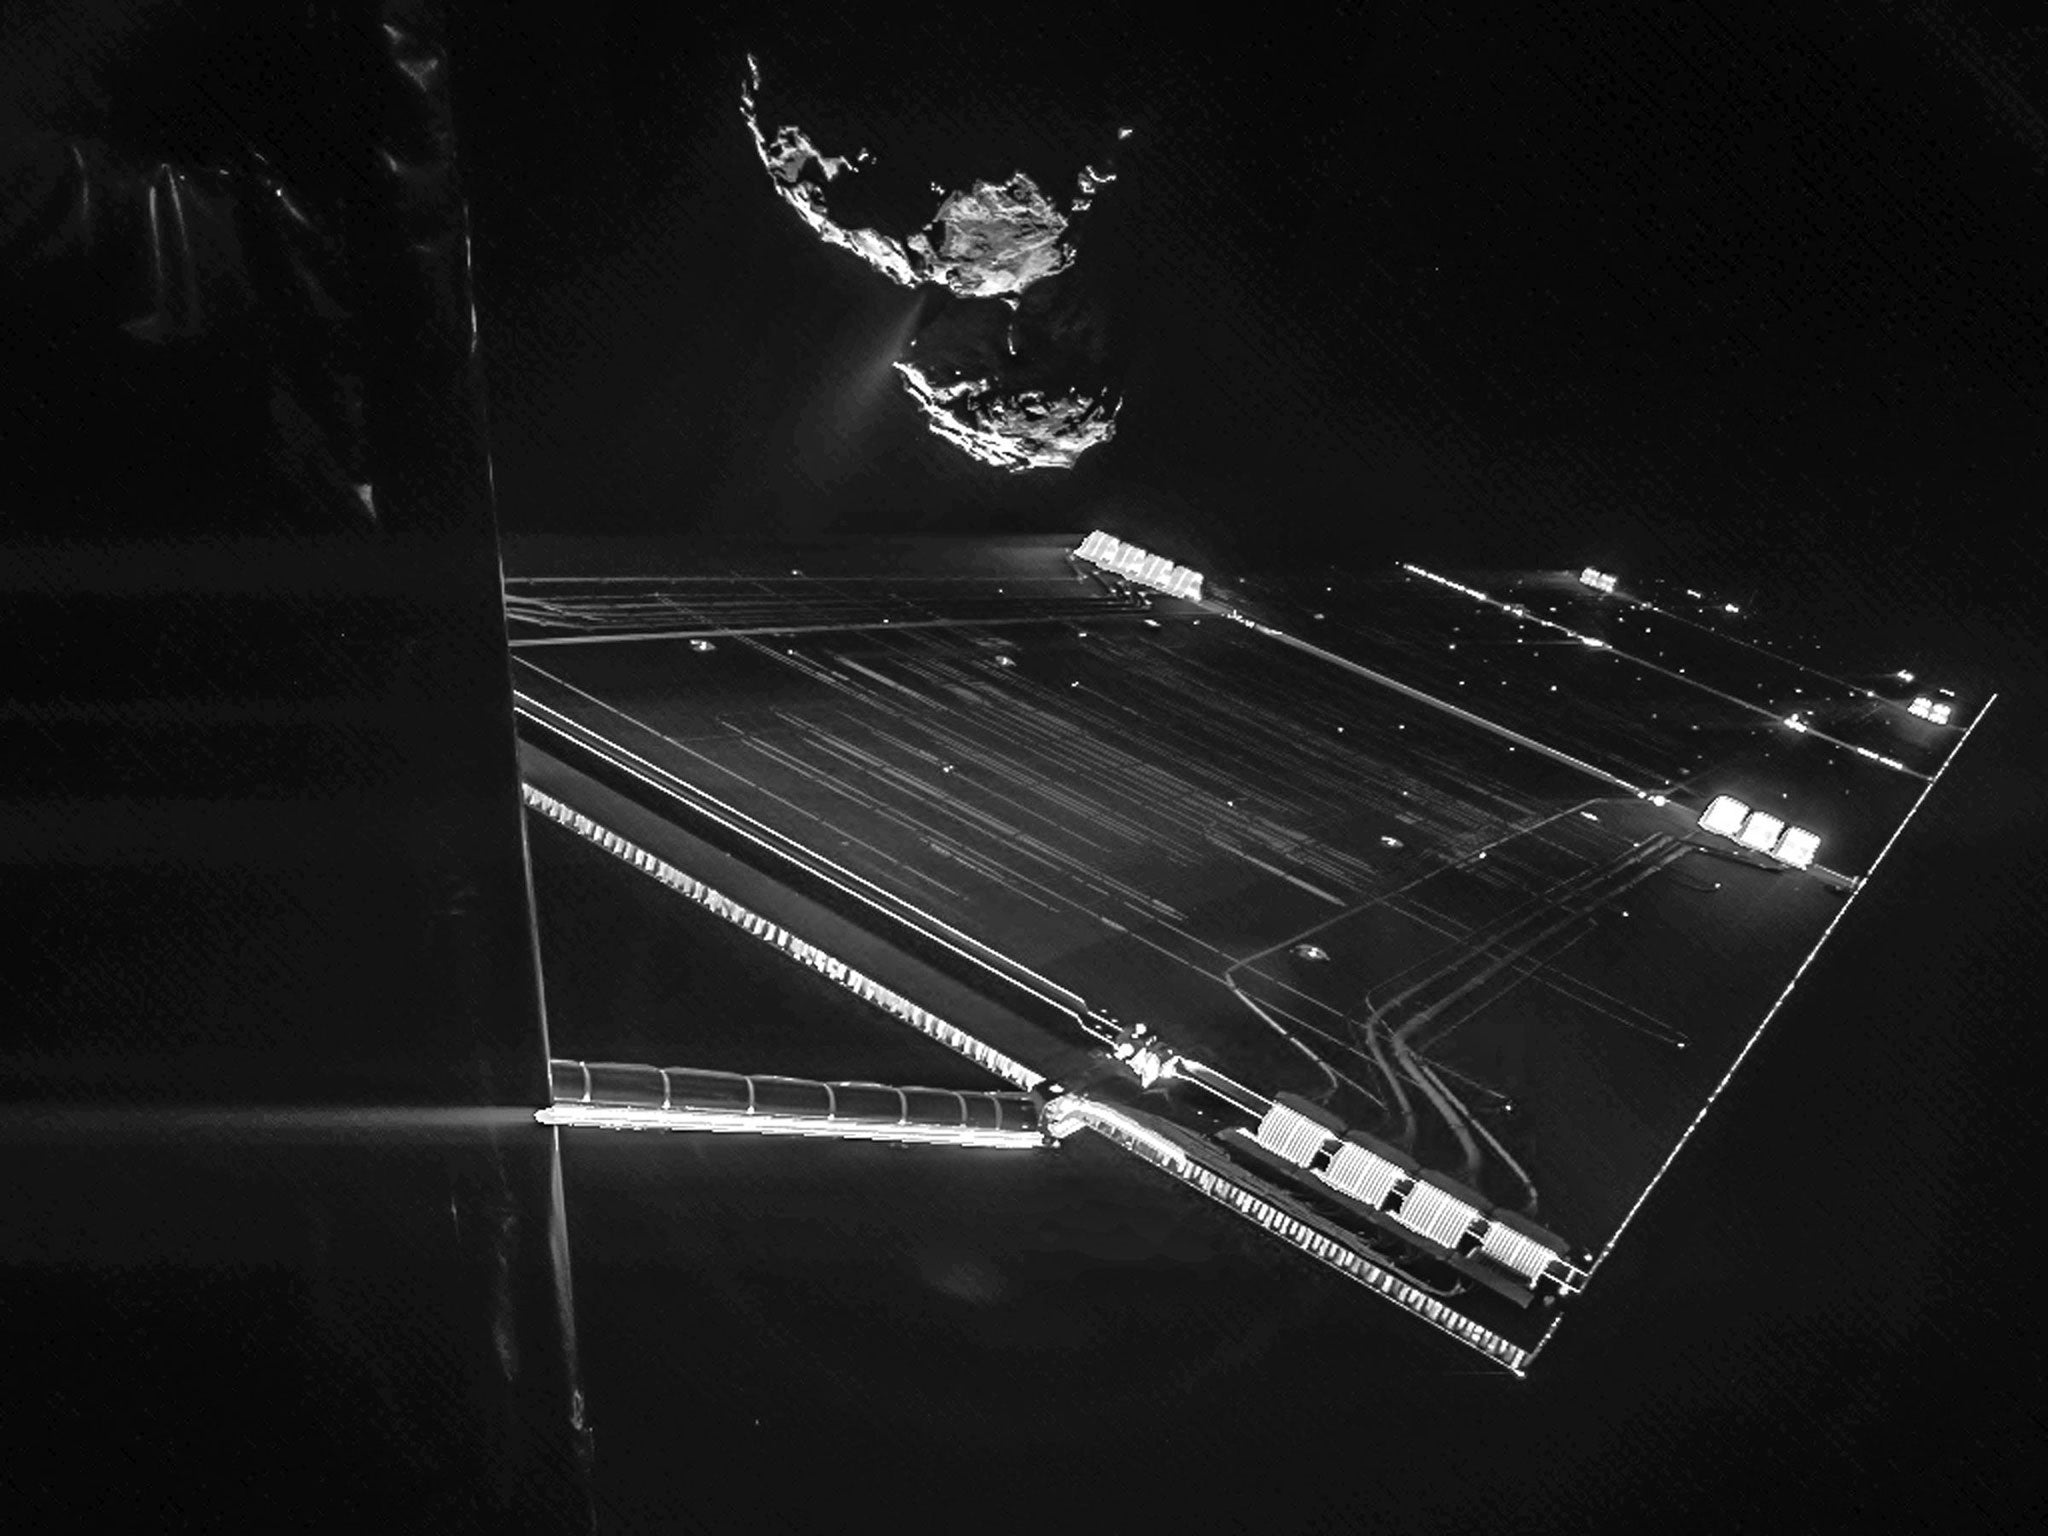 Image taken on 7 October 2014 by the CIVA camera on Rosetta's Philae lander from a distance of about 16 km from the surface of the comet. It captures the side of the Rosetta spacecraft and one of Rosetta's 14 m-long solar wings, with the comet in the back